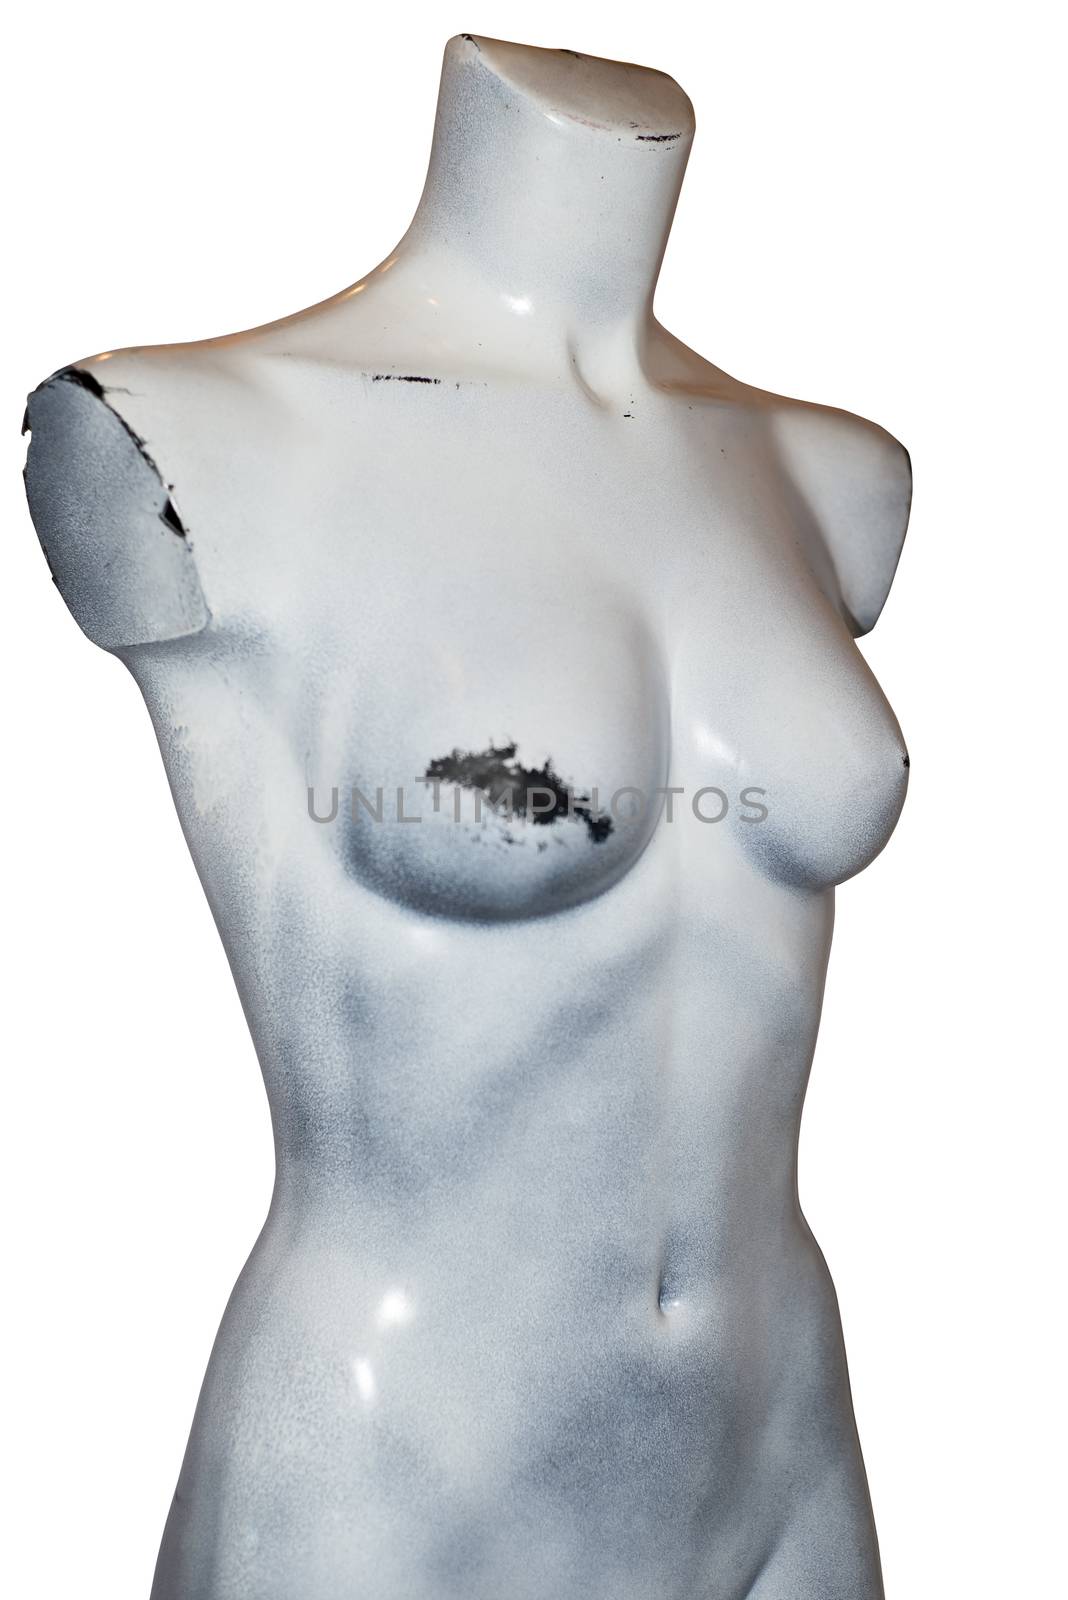 grey mannequin full female torso with a clipping path